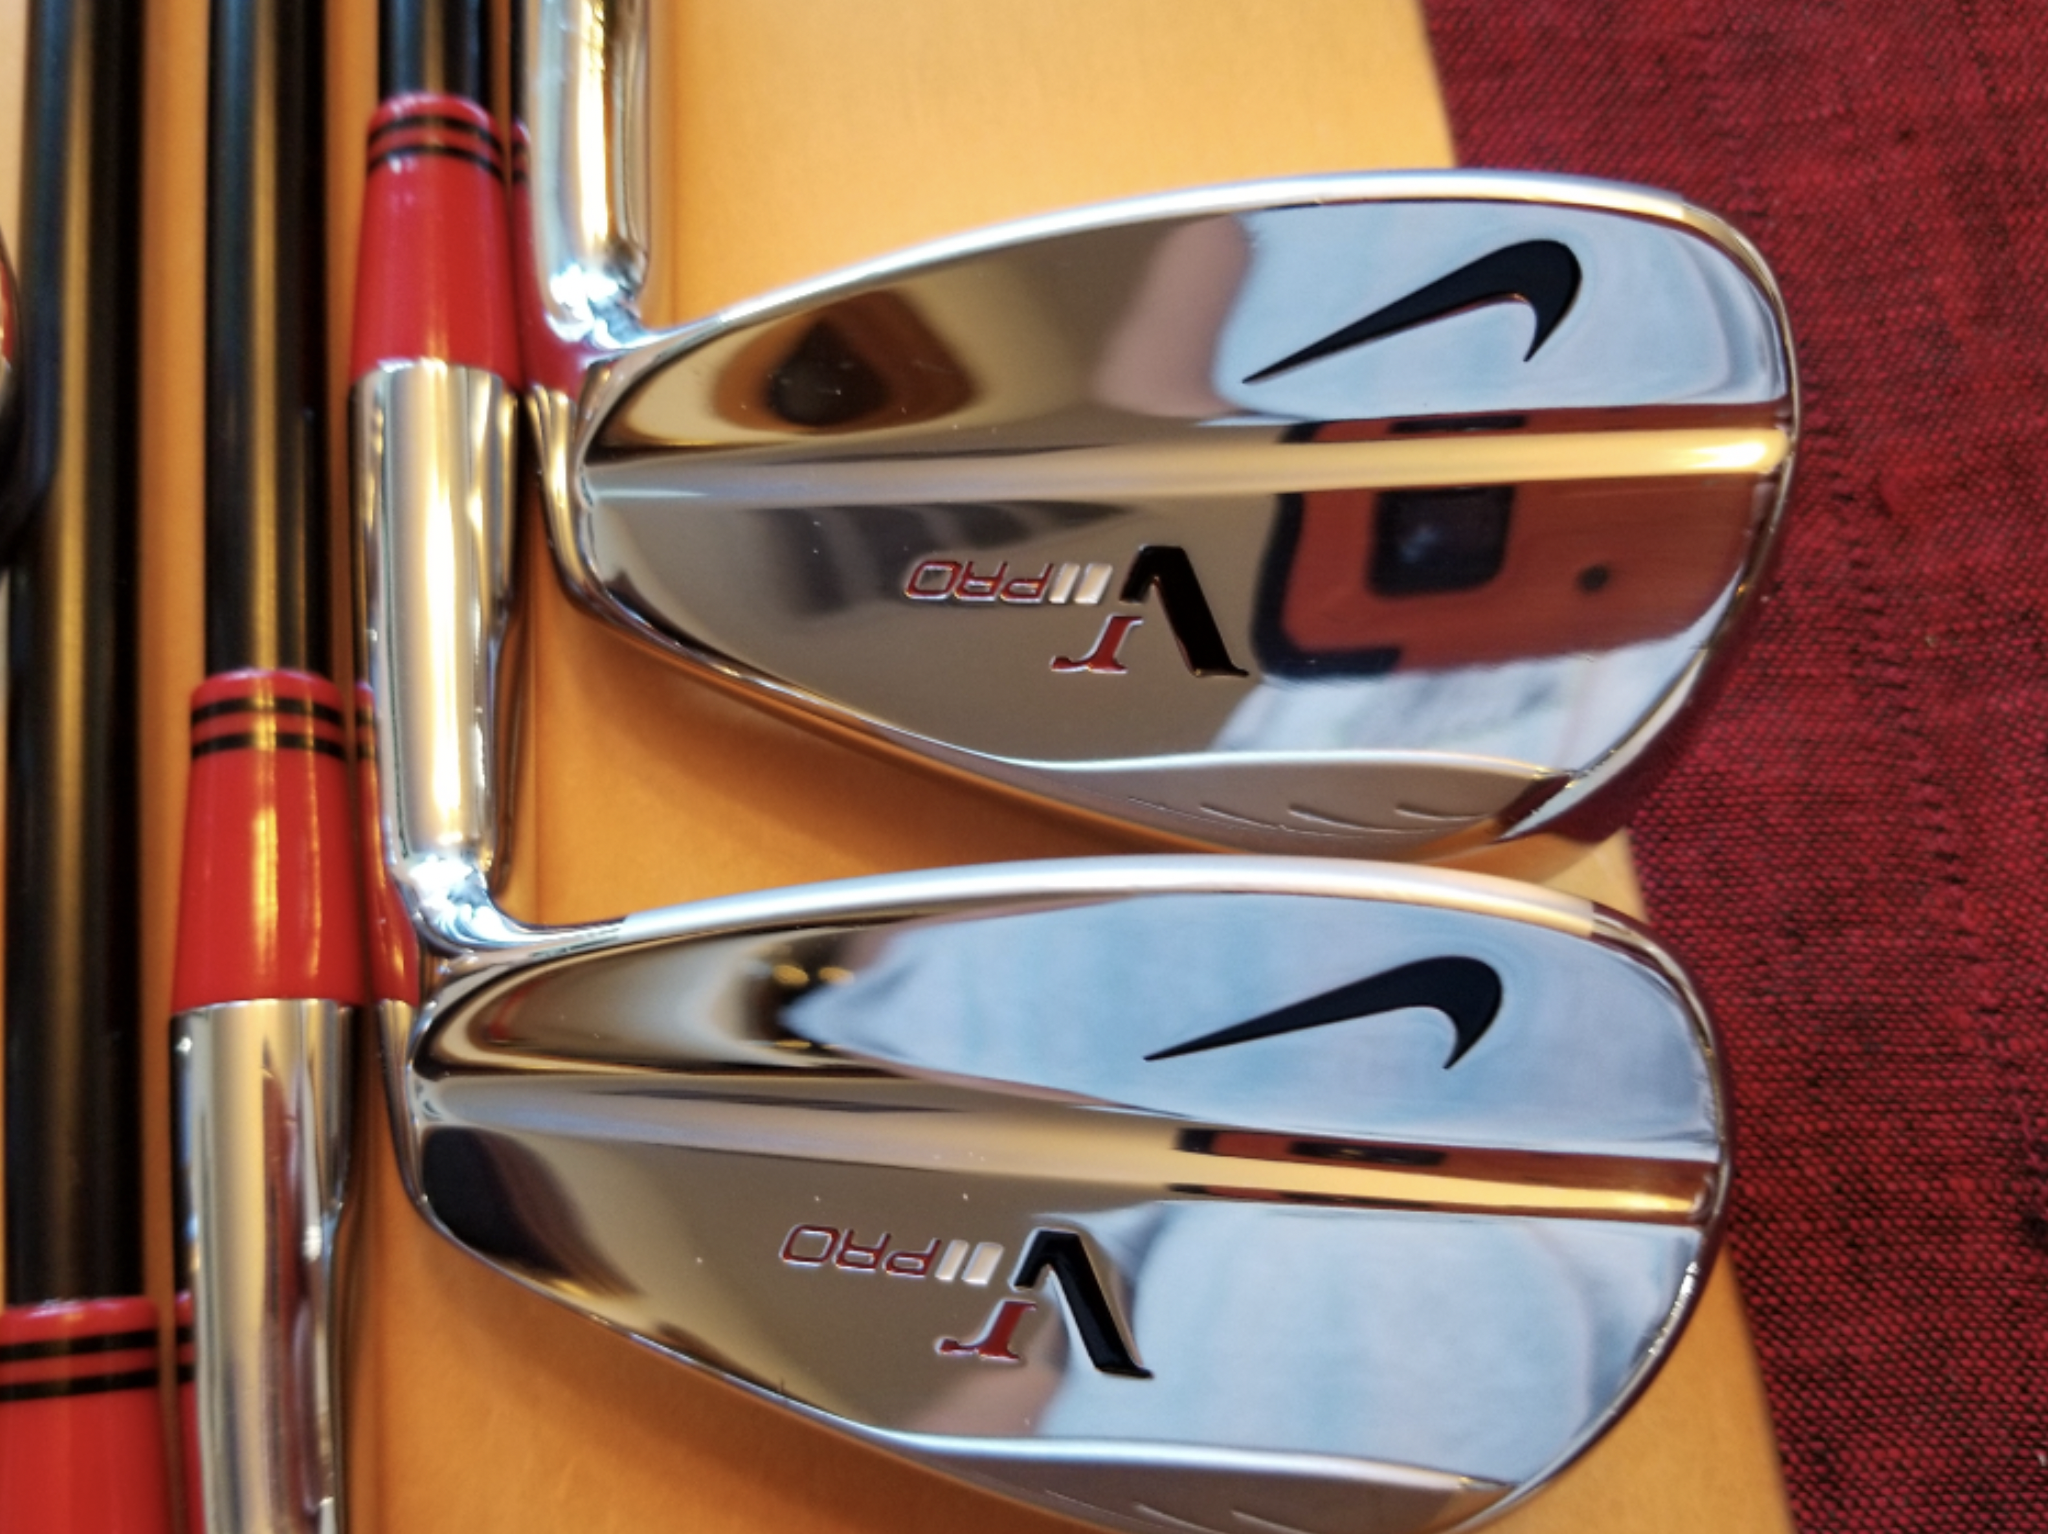 Nervio florero Ambiguo Coolest thing for sale in the GolfWRX Classifieds (08/16/21): Nike VR Pro  blades – GolfWRX